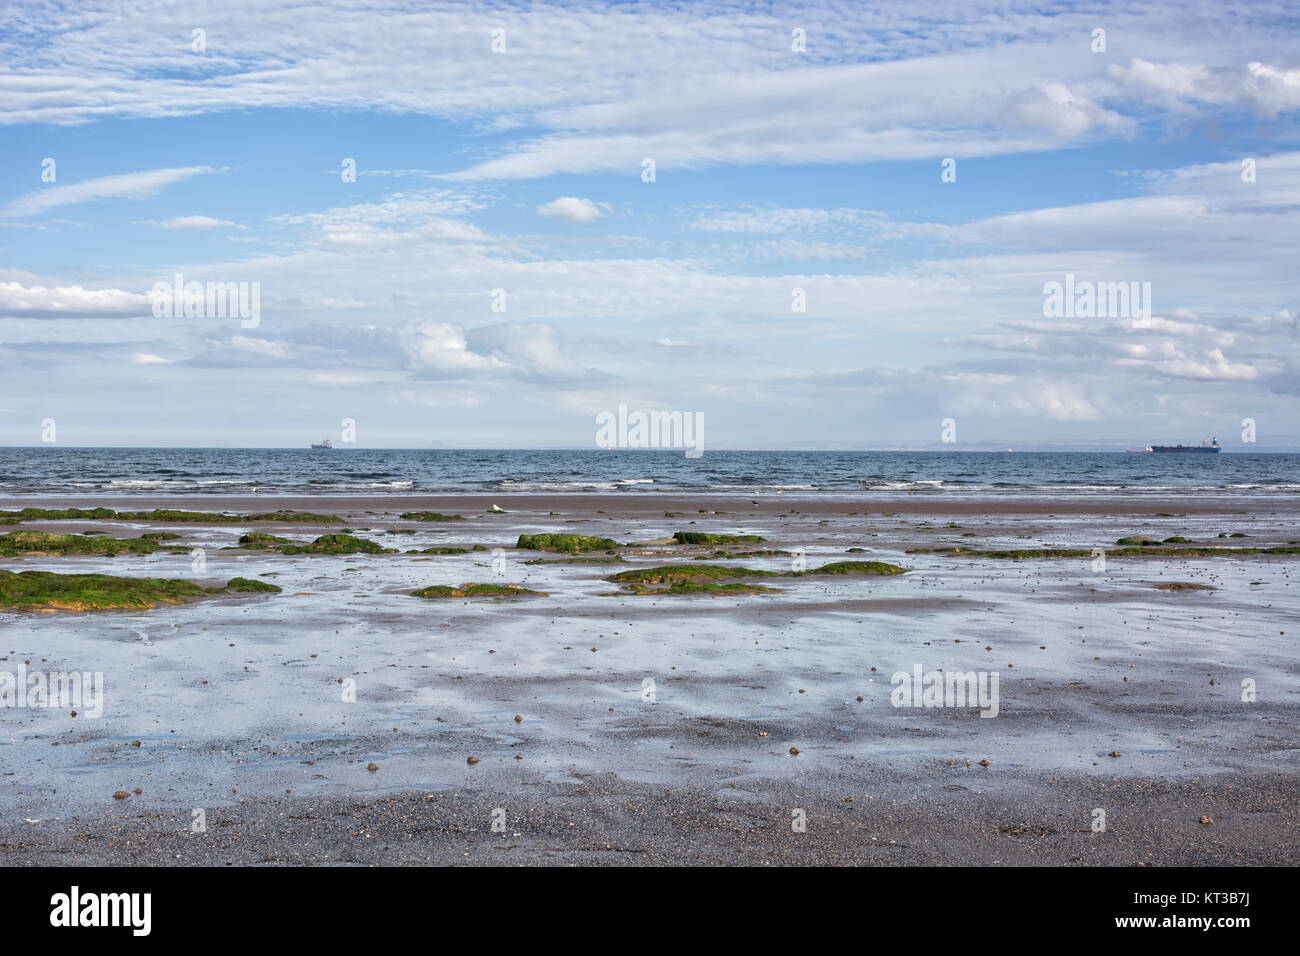 Coastal landscape in Scotland, UK, the town of Kirkcaldy. Low tide, ships on the horizon. Stock Photo